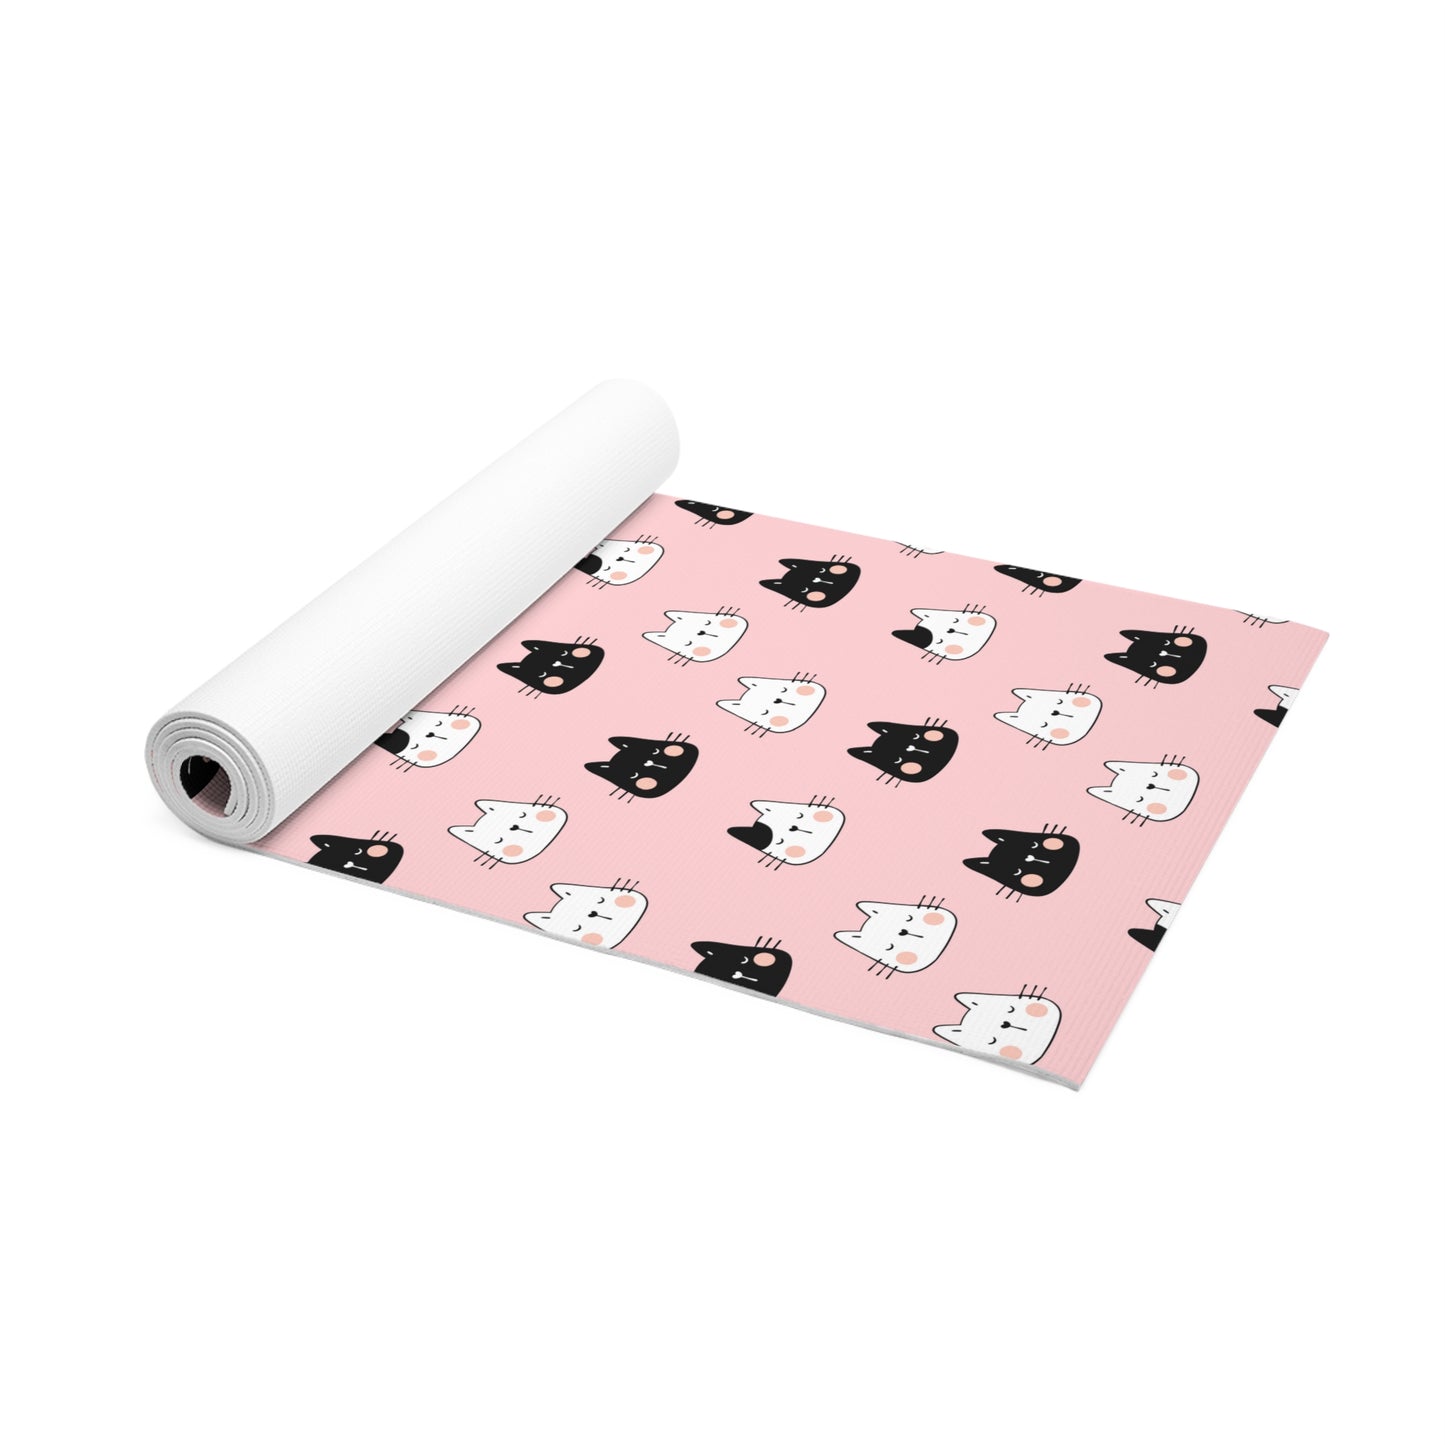 Black and White Cats with a Pink Background Foam Yoga Mat, Foam Material, Lightweight, and Cushiony